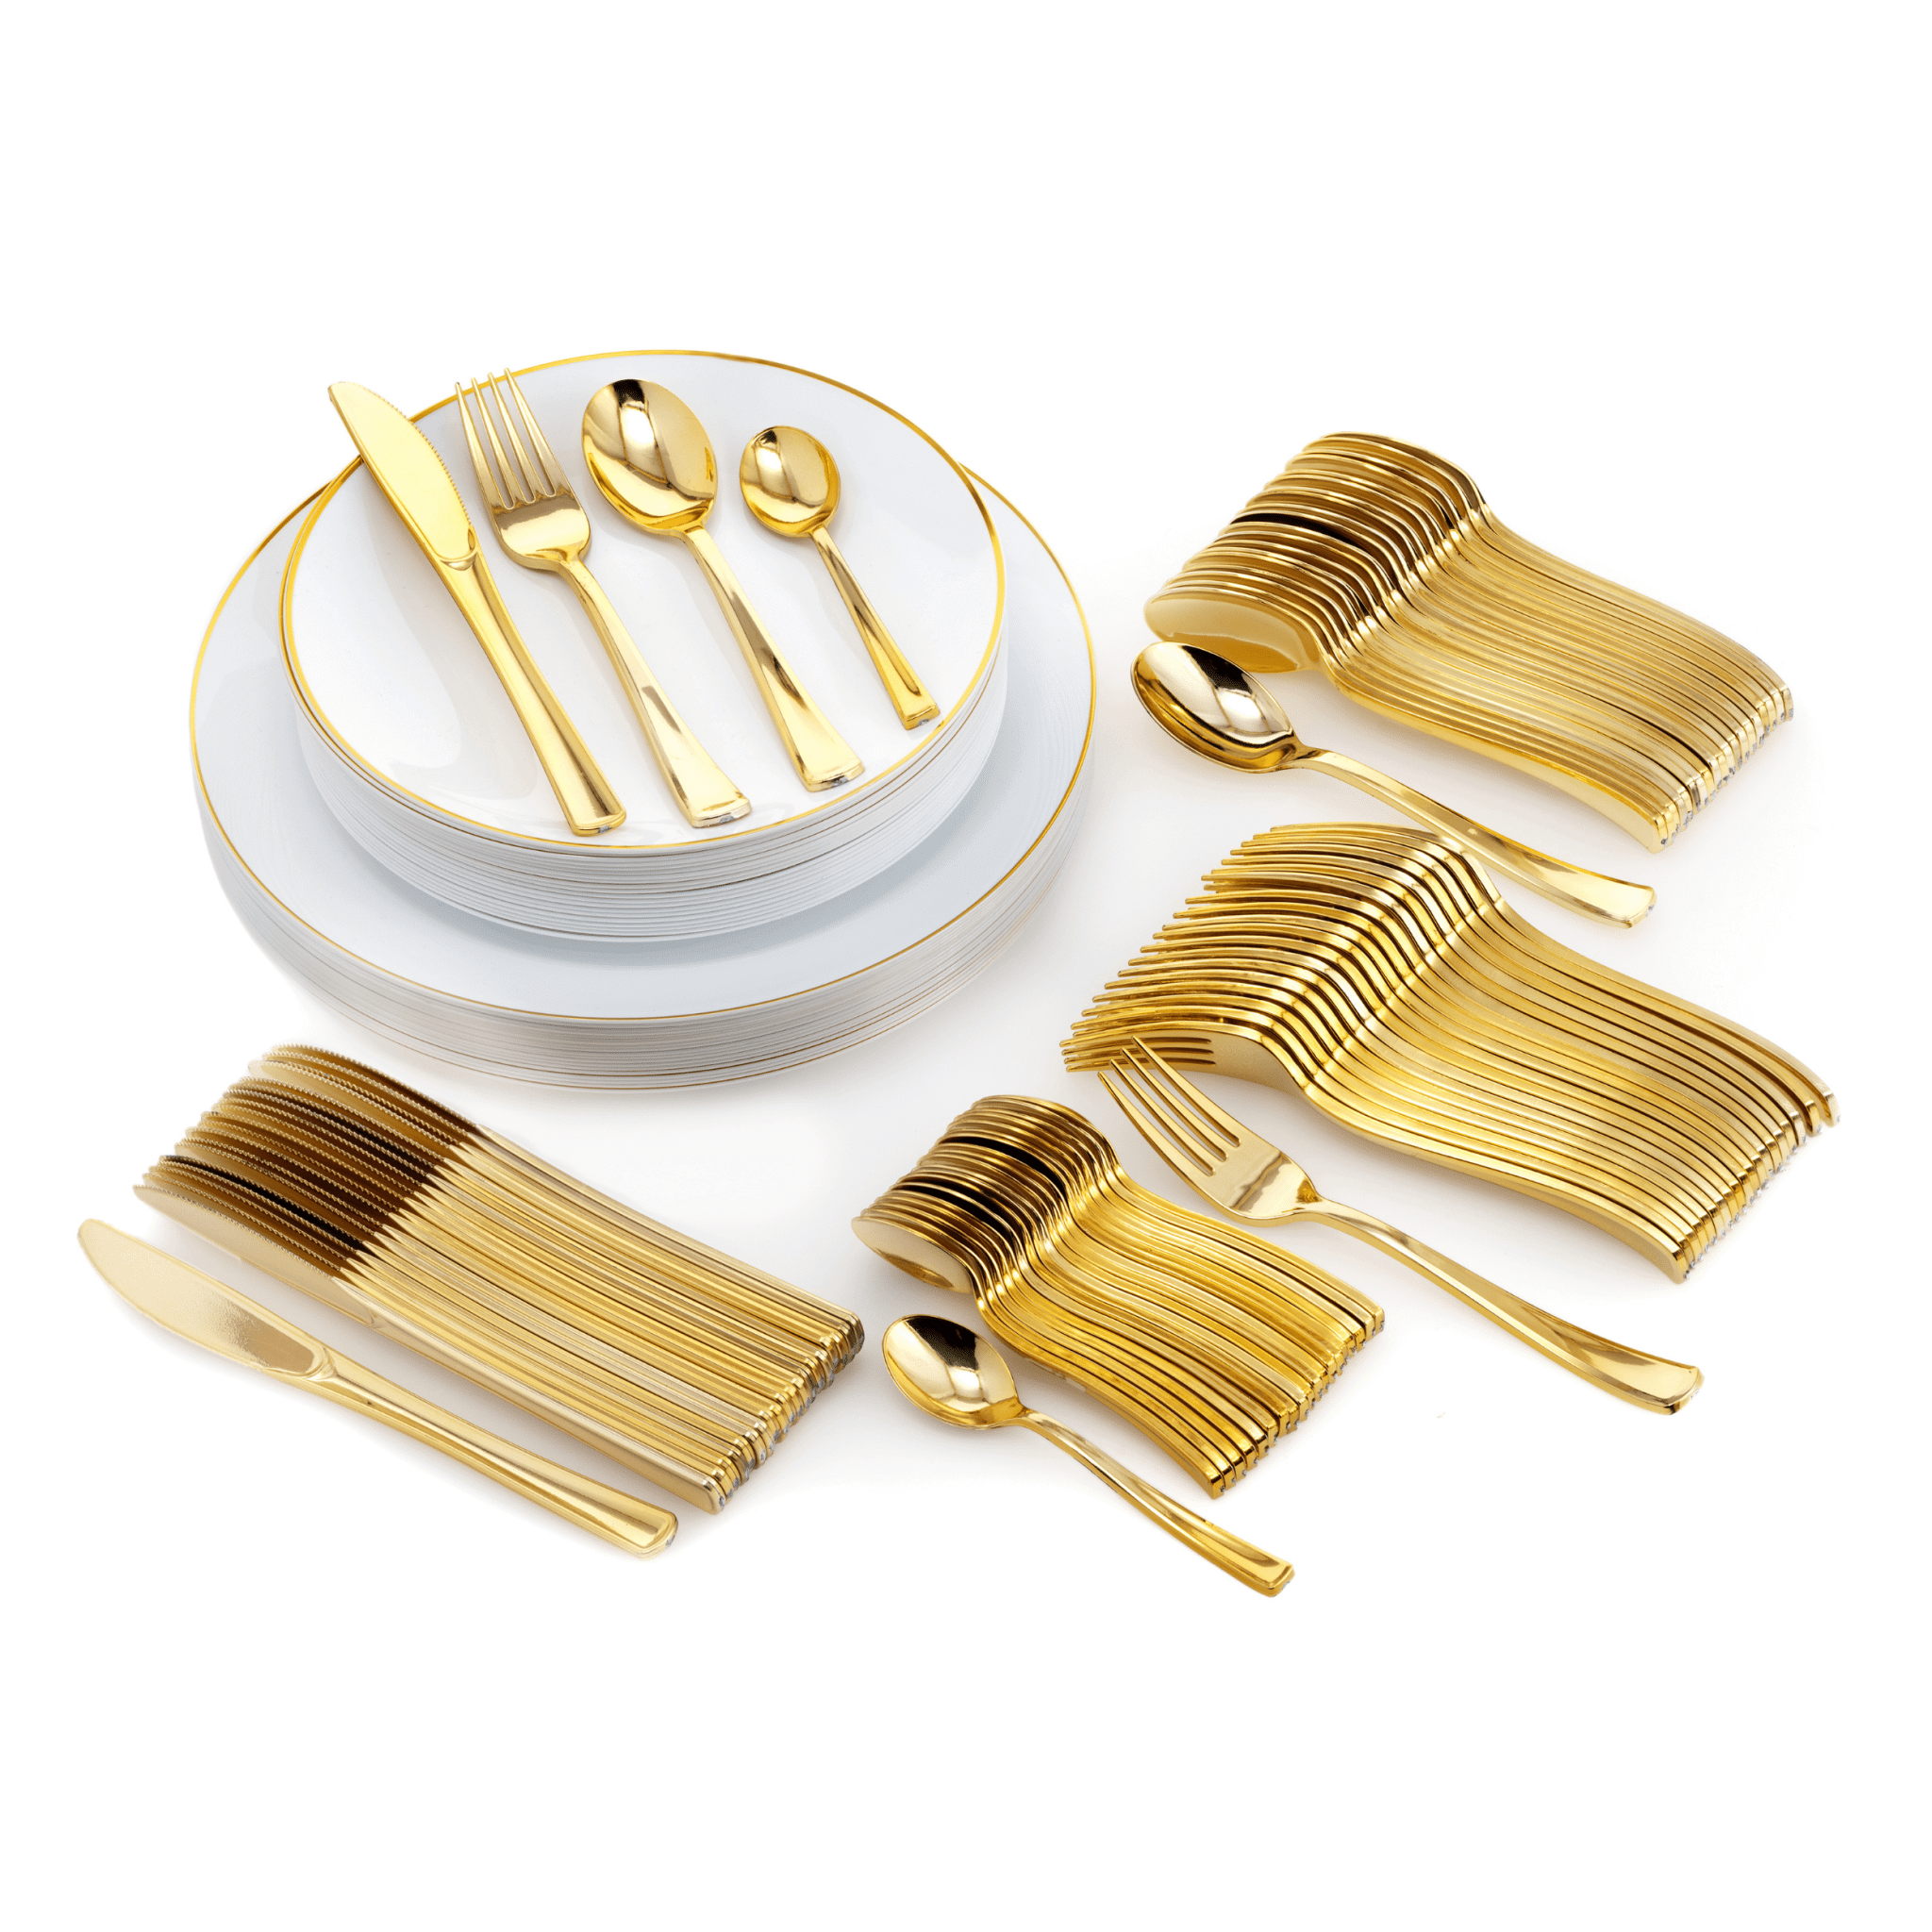 140 Piece White & Gold Rim Combo Set | Serves 20 Guests - Yom Tov Settings